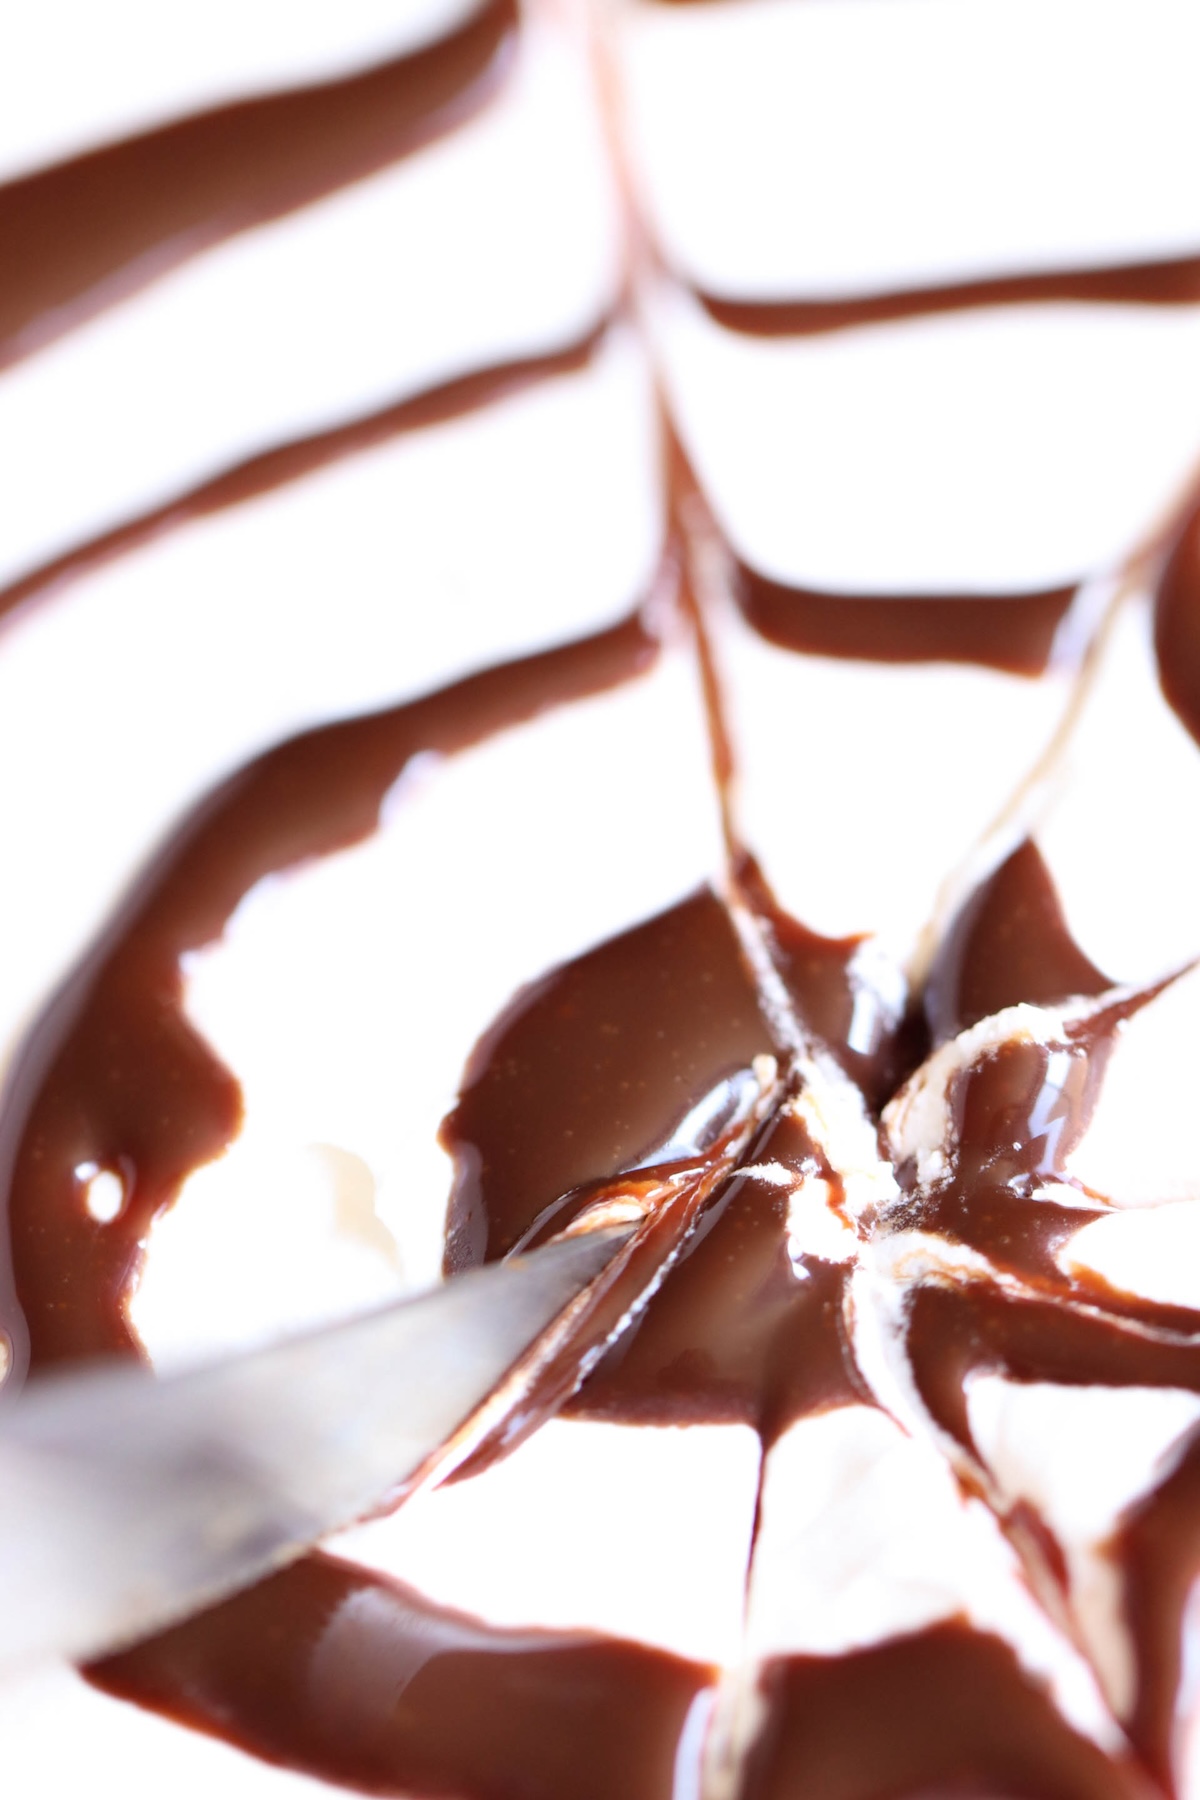 A close-up of a dessert with a knife cutting through a white surface drizzled with chocolate syrup in a star-like pattern.